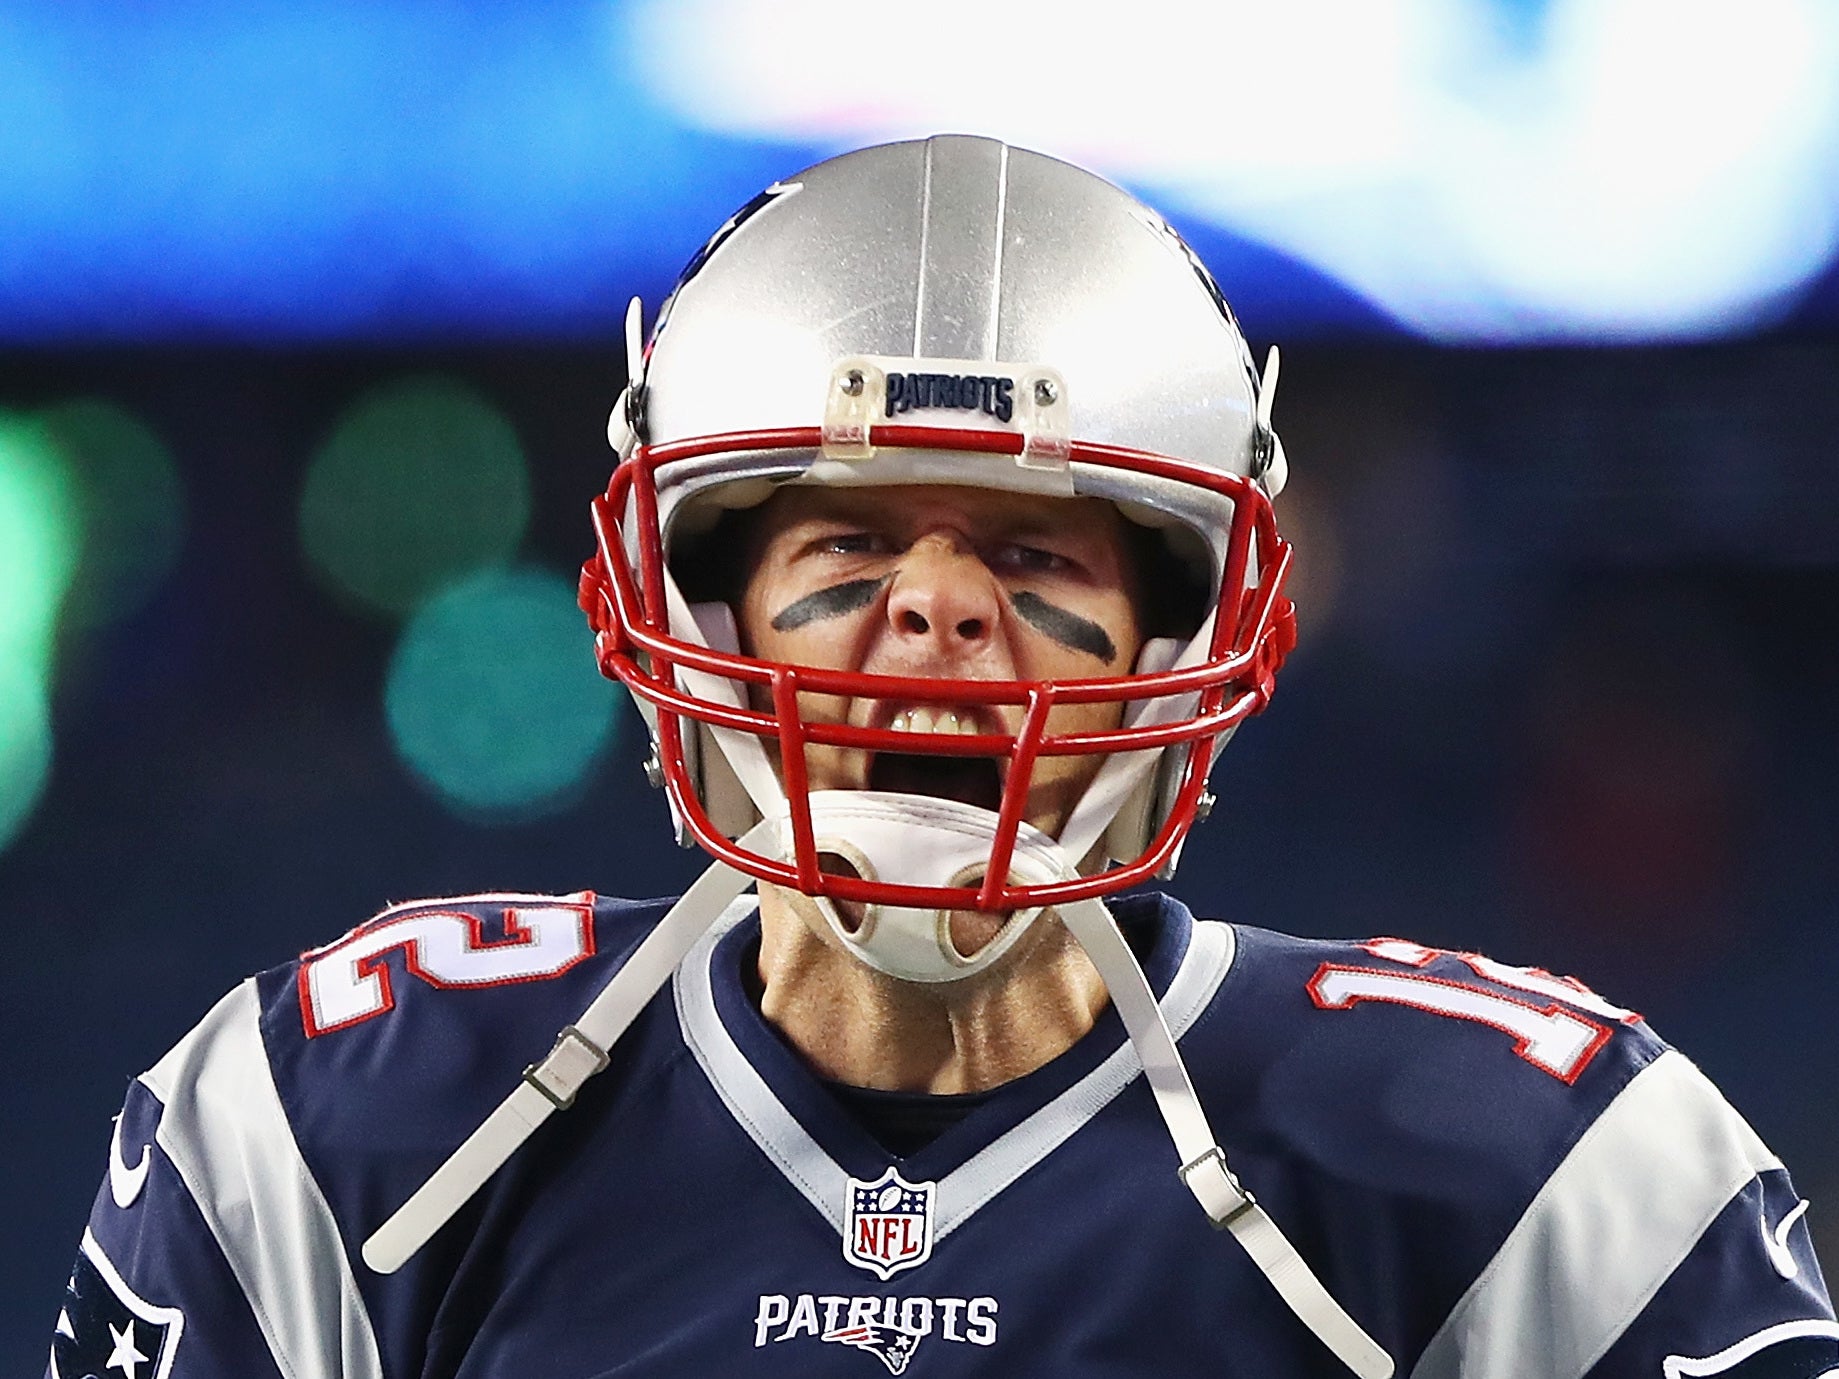 Tom Brady is set to join the Tampa Bay Buccaneers